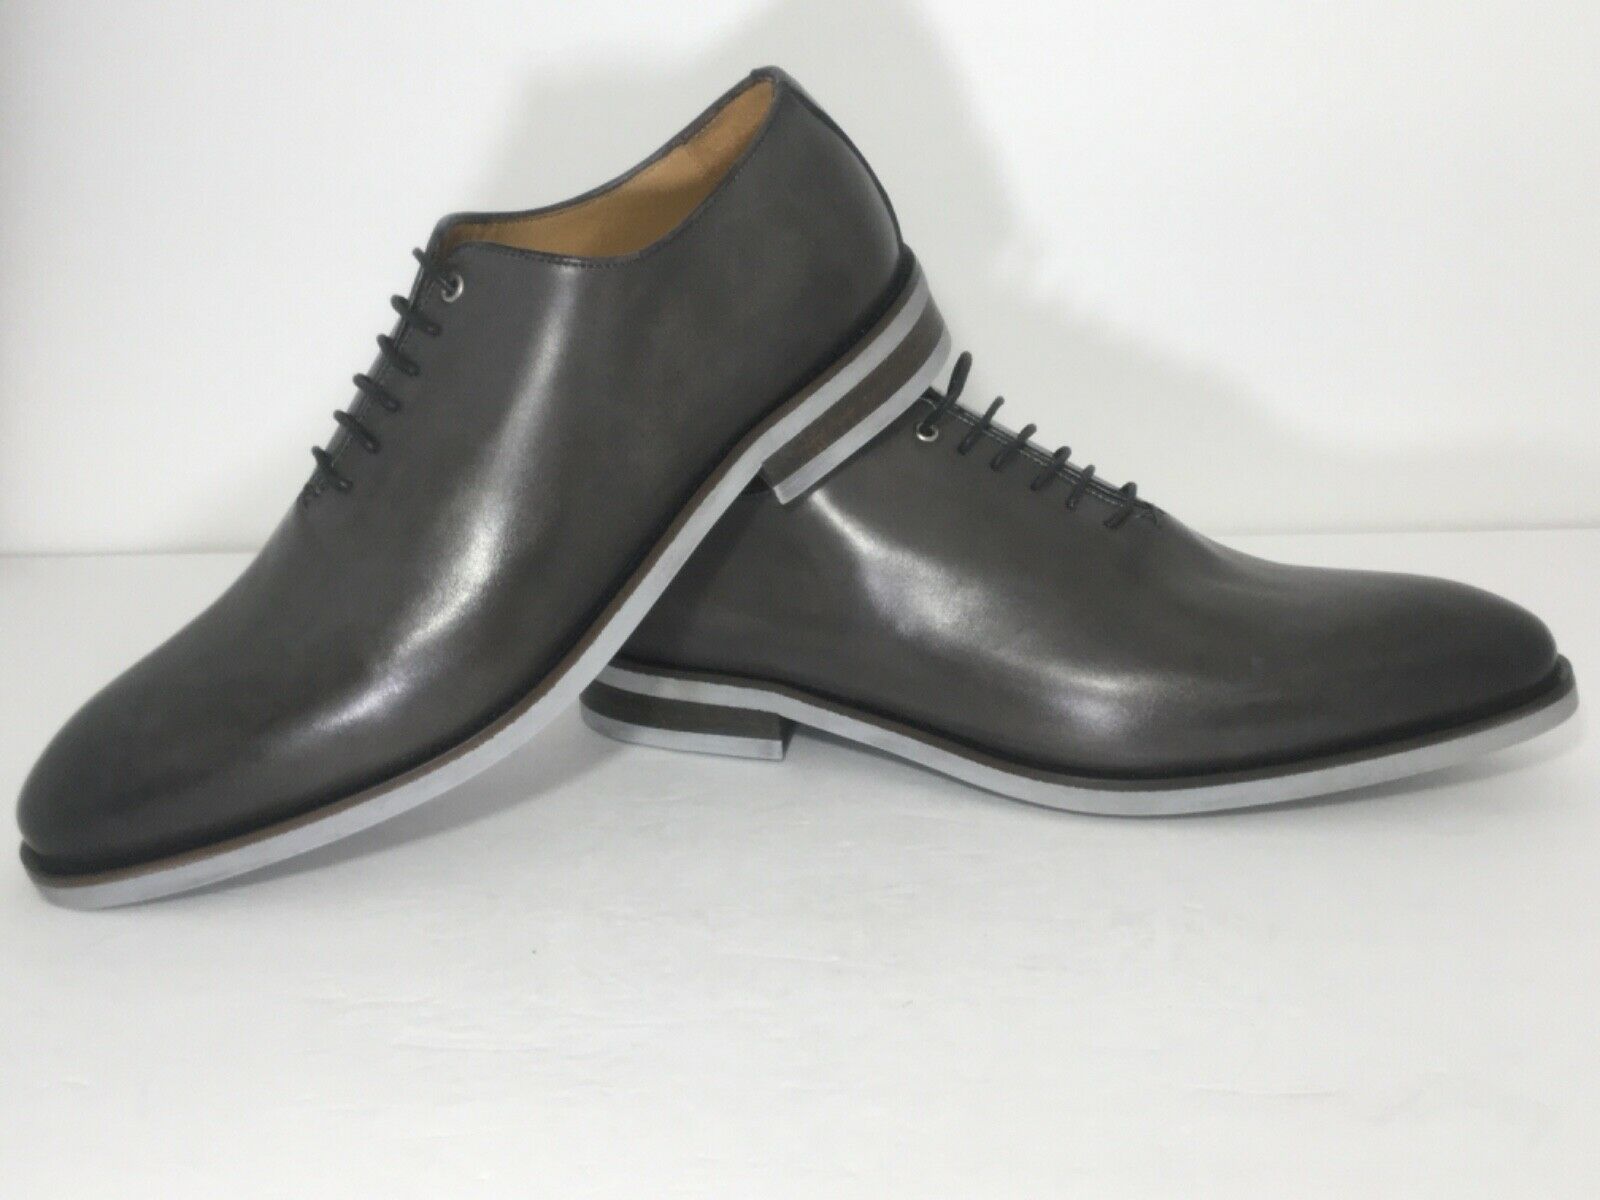 NEW size 12 Men's Grey Oxford Leather Dress Shoes Rubber Sole